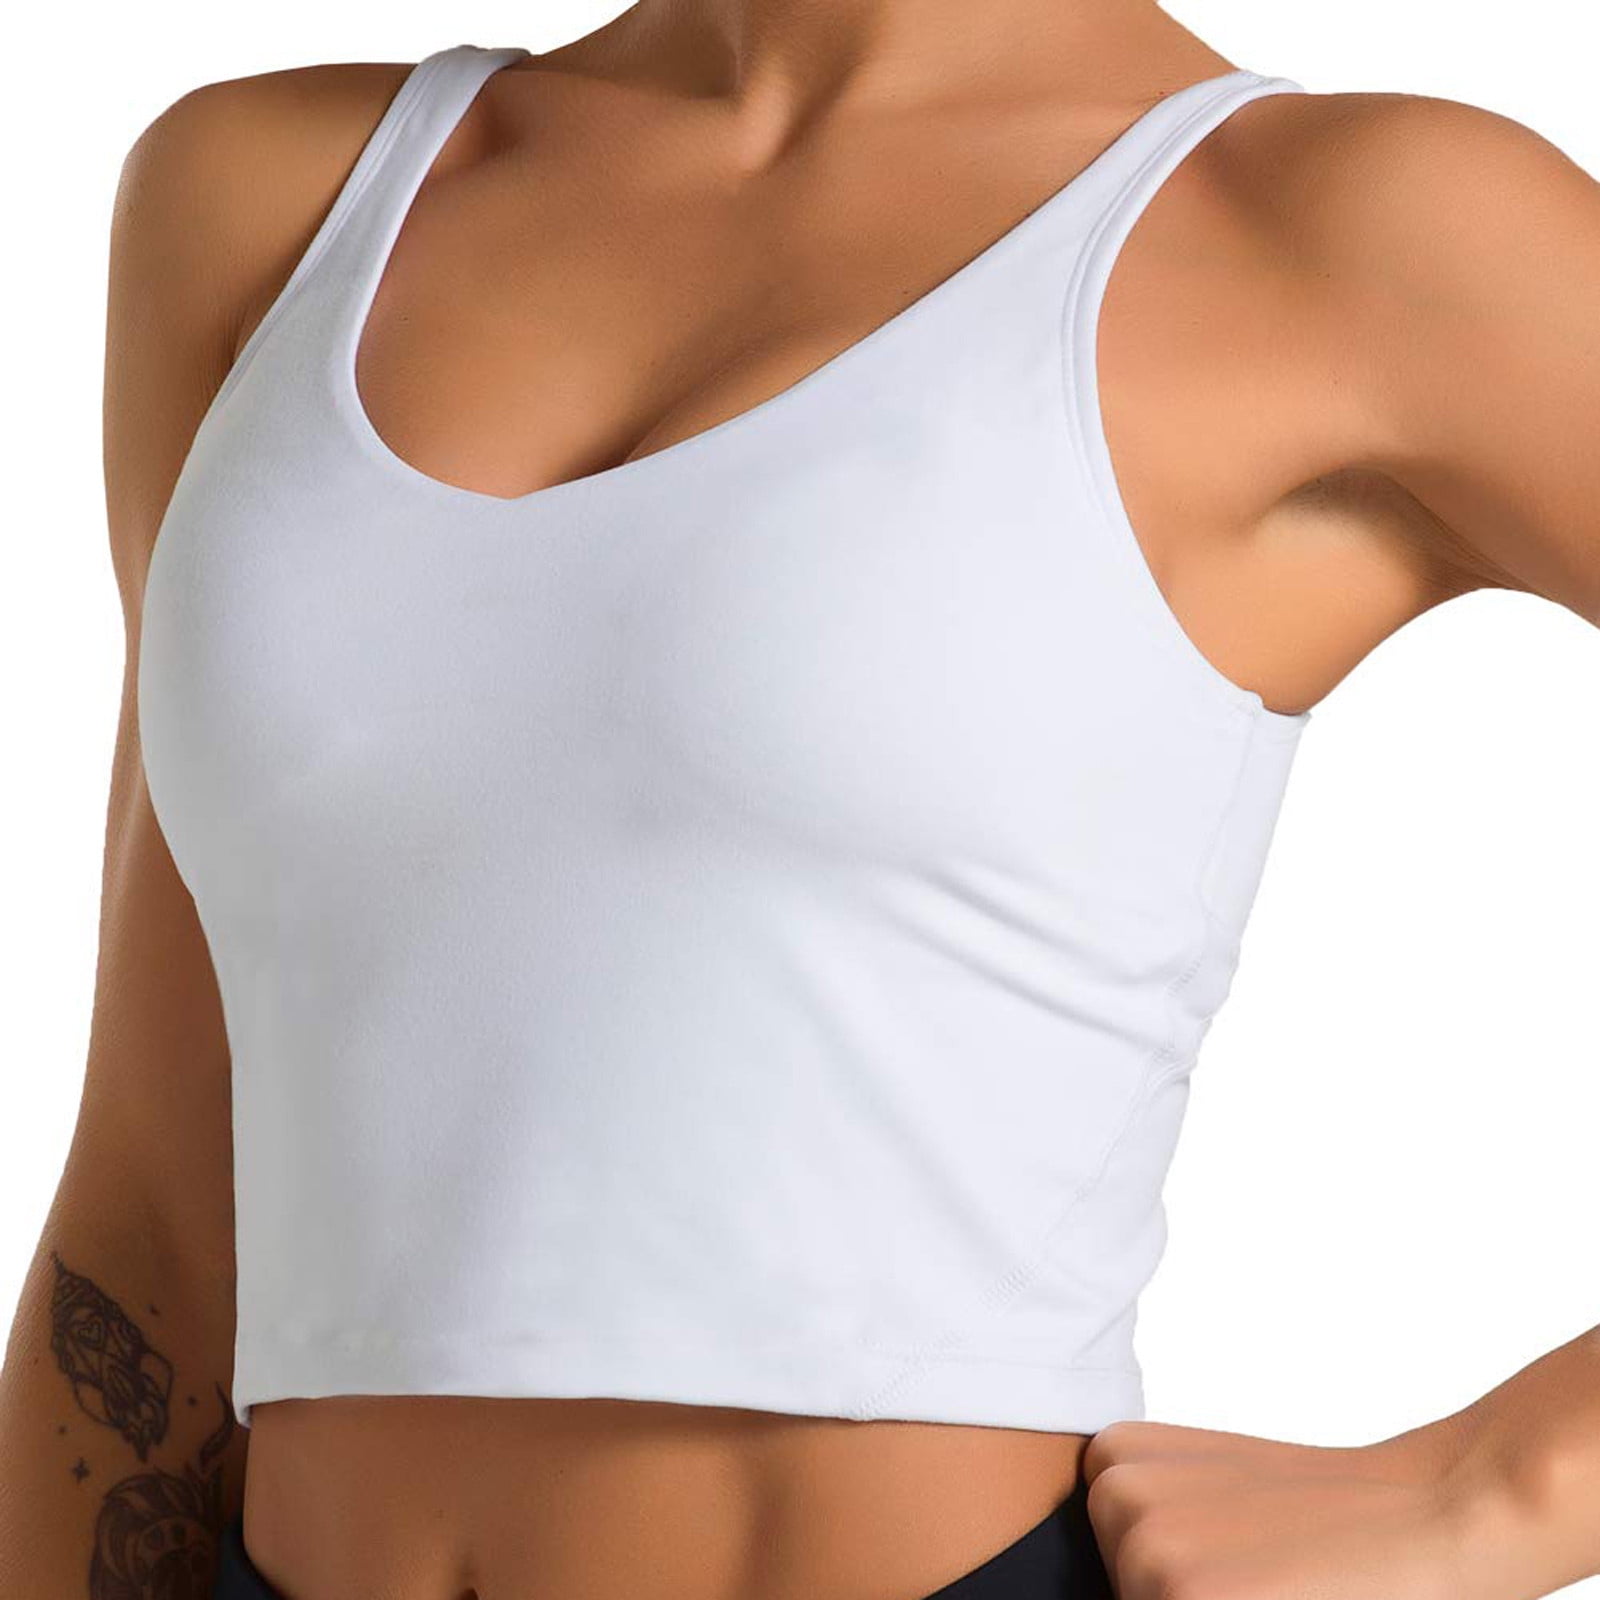 Outdoor Sport Crop Tops for Women Sleeveless Casual Vest Ladies Chest pad Movement Short Tank Tops 